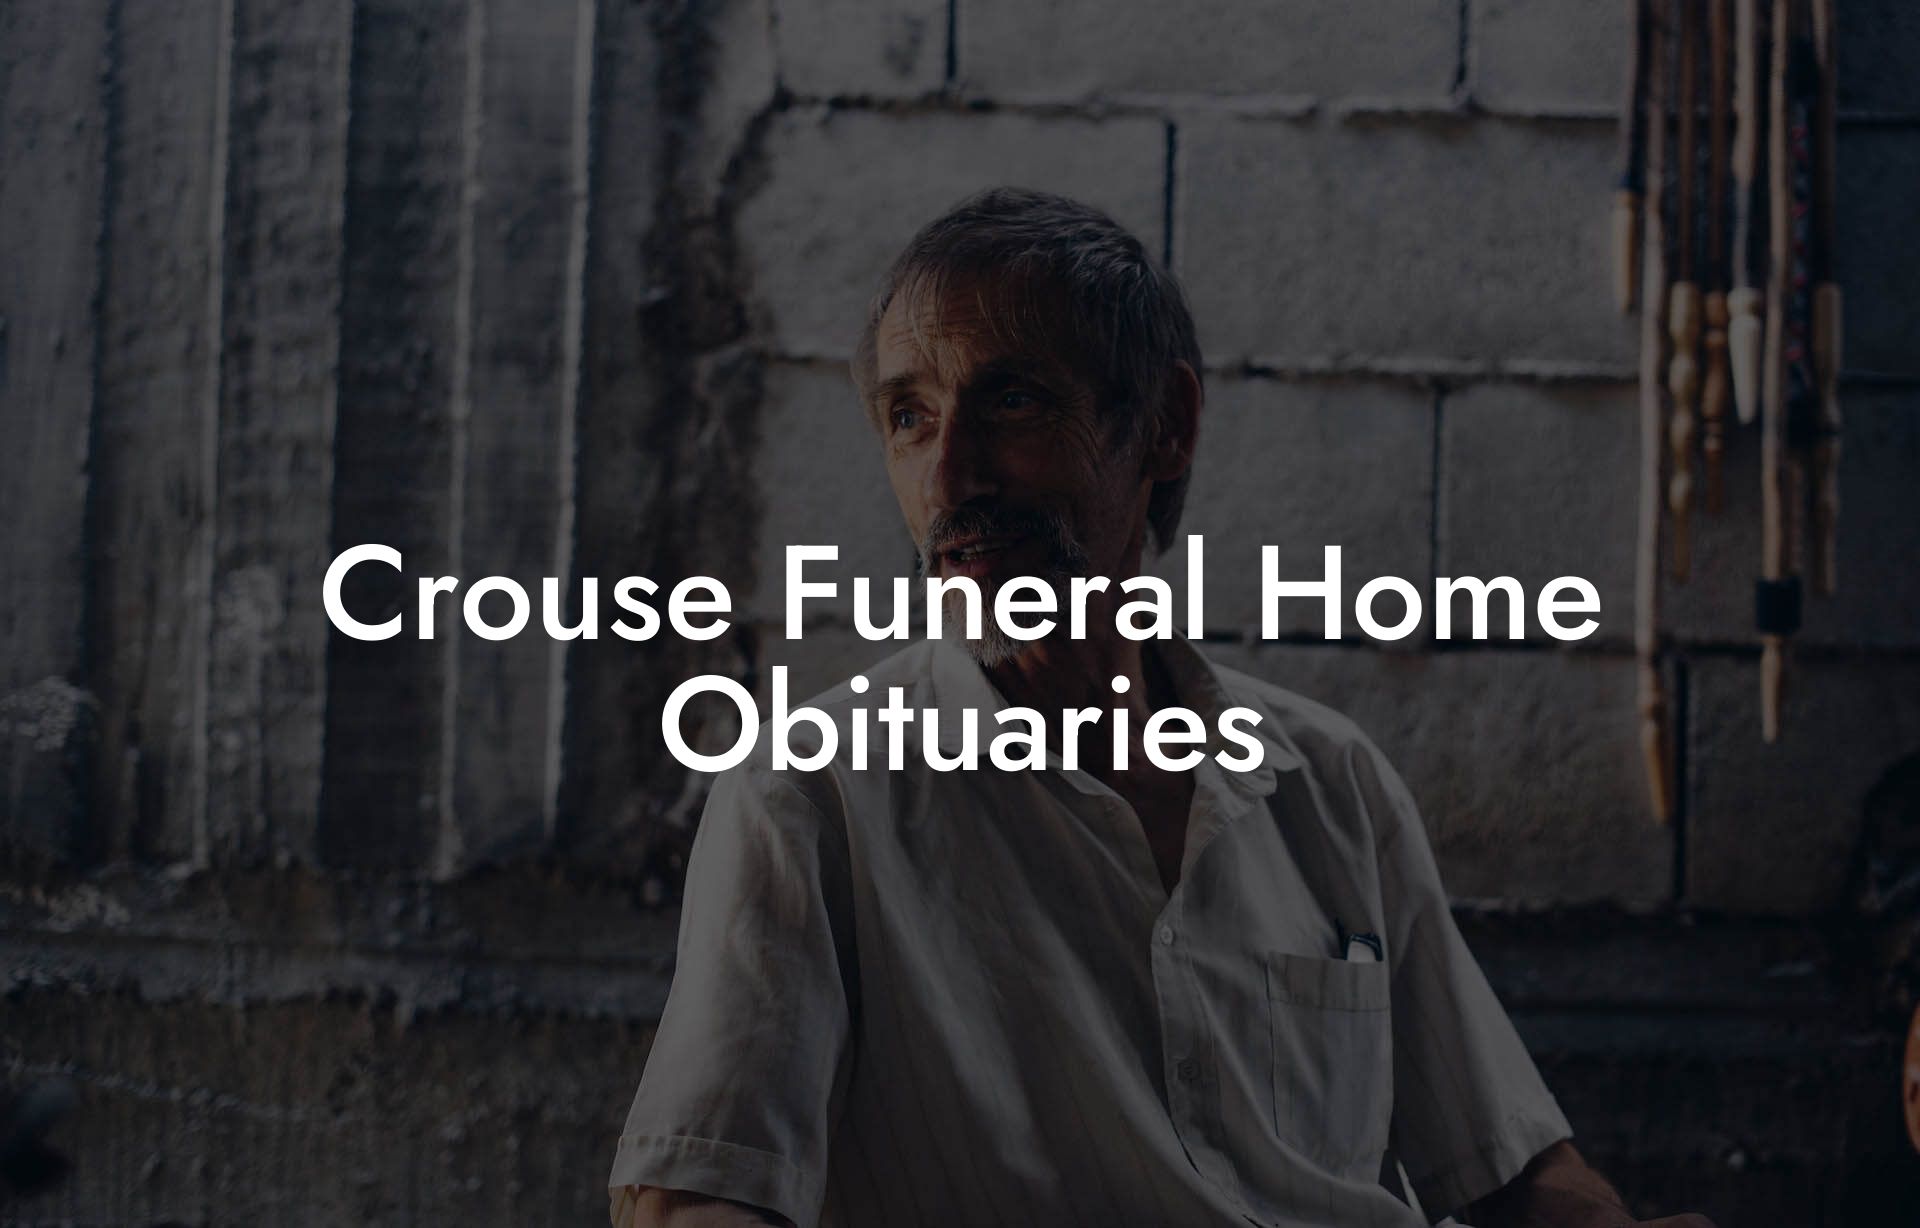 Crouse Funeral Home Obituaries